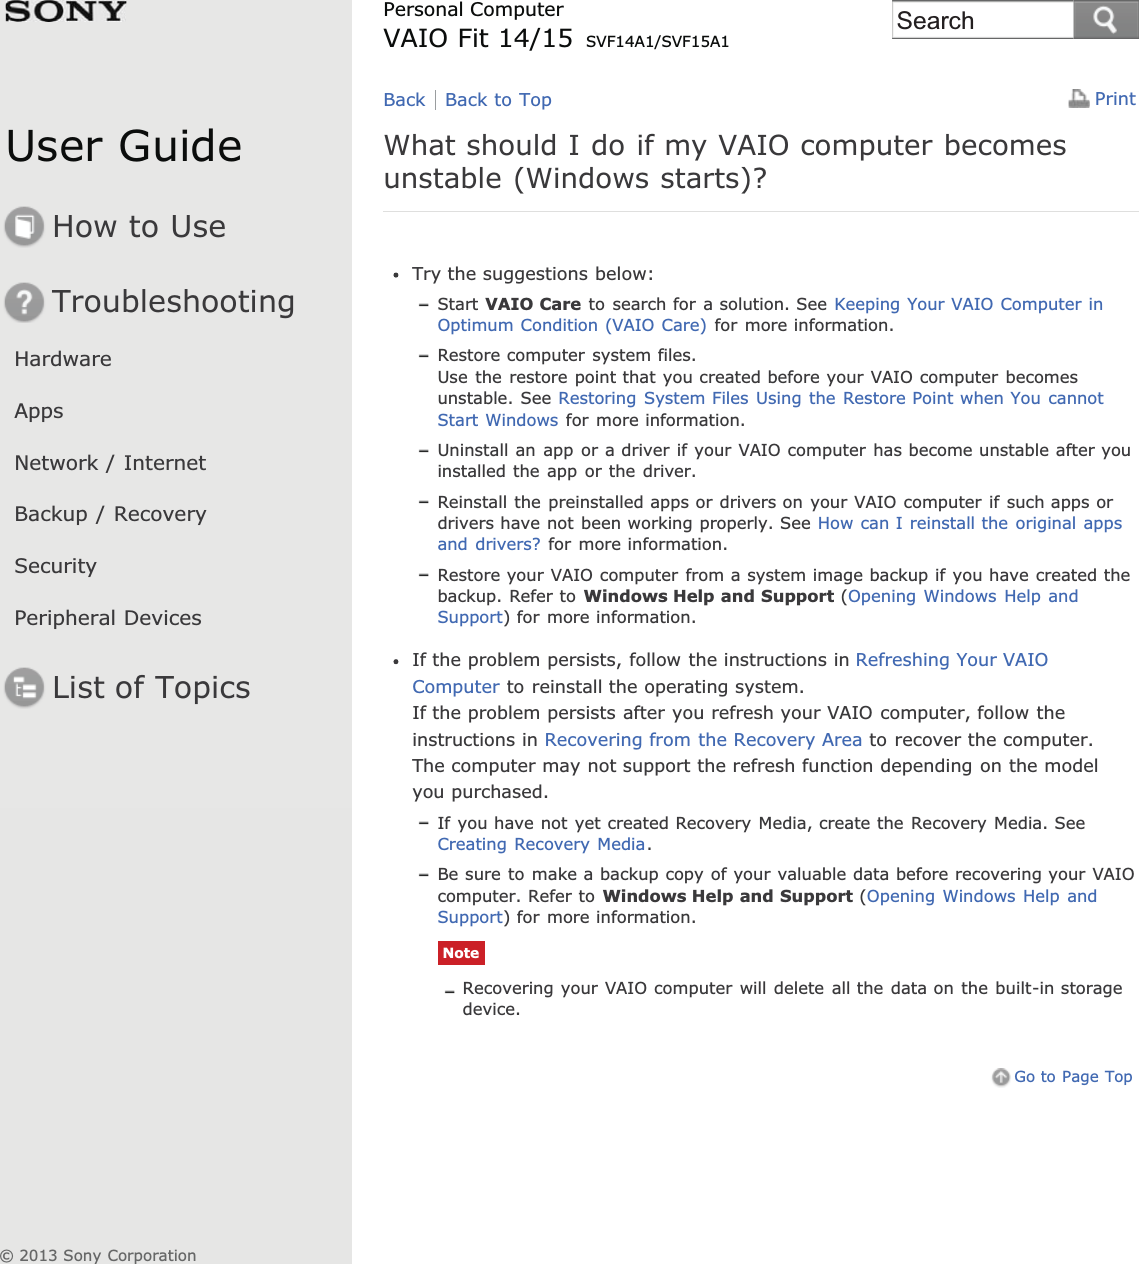 User GuideHow to UseTroubleshootingHardwareAppsNetwork / InternetBackup / RecoverySecurityPeripheral DevicesList of TopicsPrintPersonal ComputerVAIO Fit 14/15 SVF14A1/SVF15A1What should I do if my VAIO computer becomesunstable (Windows starts)?Try the suggestions below:Start VAIO Care to search for a solution. See Keeping Your VAIO Computer inOptimum Condition (VAIO Care) for more information.Restore computer system files.Use the restore point that you created before your VAIO computer becomesunstable. See Restoring System Files Using the Restore Point when You cannotStart Windows for more information.Uninstall an app or a driver if your VAIO computer has become unstable after youinstalled the app or the driver.Reinstall the preinstalled apps or drivers on your VAIO computer if such apps ordrivers have not been working properly. See How can I reinstall the original appsand drivers? for more information.Restore your VAIO computer from a system image backup if you have created thebackup. Refer to Windows Help and Support (Opening Windows Help andSupport) for more information.If the problem persists, follow the instructions in Refreshing Your VAIOComputer to reinstall the operating system.If the problem persists after you refresh your VAIO computer, follow theinstructions in Recovering from the Recovery Area to recover the computer.The computer may not support the refresh function depending on the modelyou purchased.If you have not yet created Recovery Media, create the Recovery Media. SeeCreating Recovery Media.Be sure to make a backup copy of your valuable data before recovering your VAIOcomputer. Refer to Windows Help and Support (Opening Windows Help andSupport) for more information.NoteRecovering your VAIO computer will delete all the data on the built-in storagedevice.Go to Page TopBack Back to Top© 2013 Sony CorporationSearch